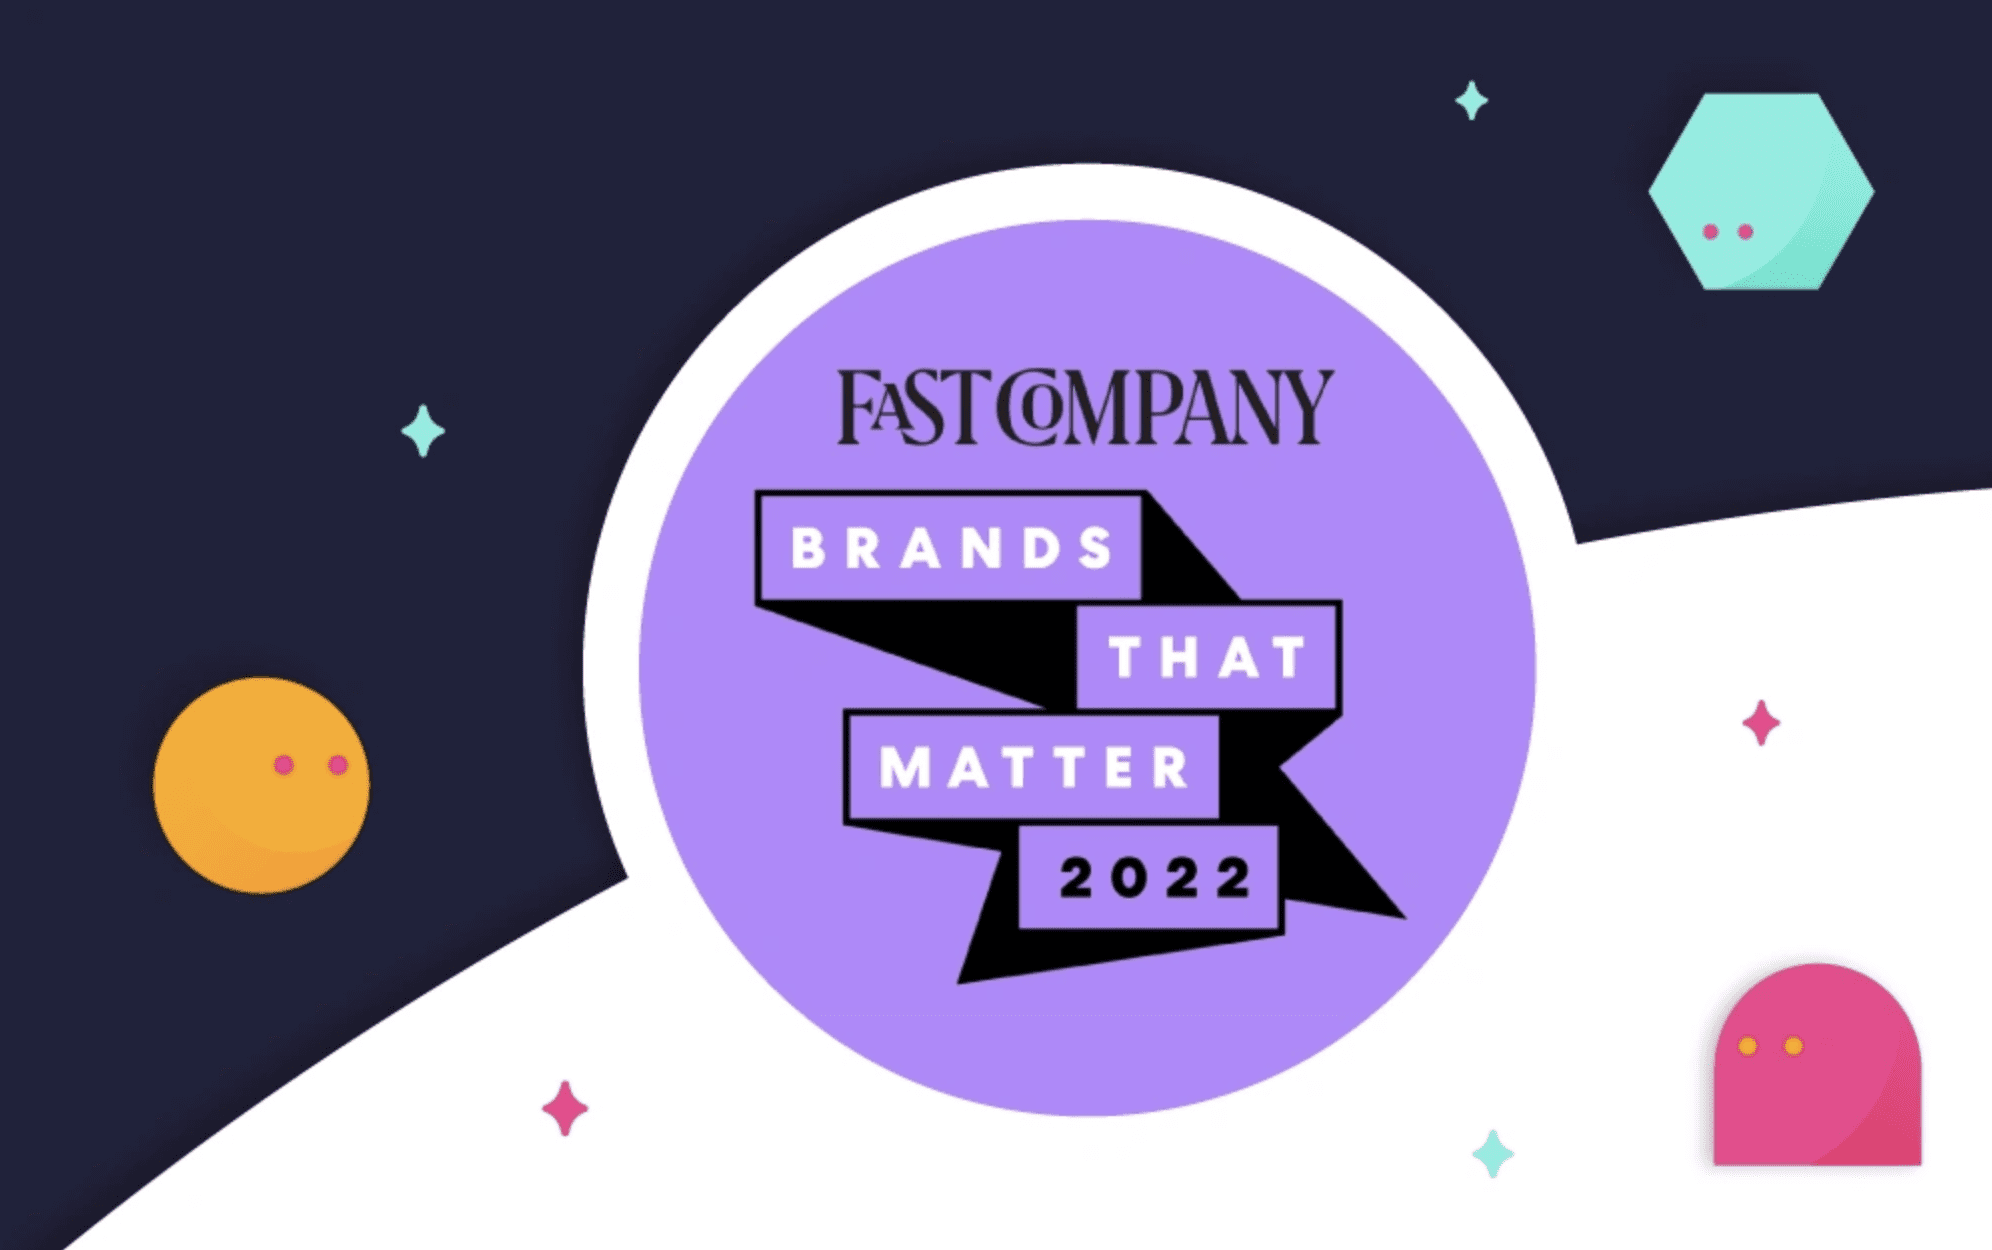 Inclusively in Fast Company’s Top Brands List